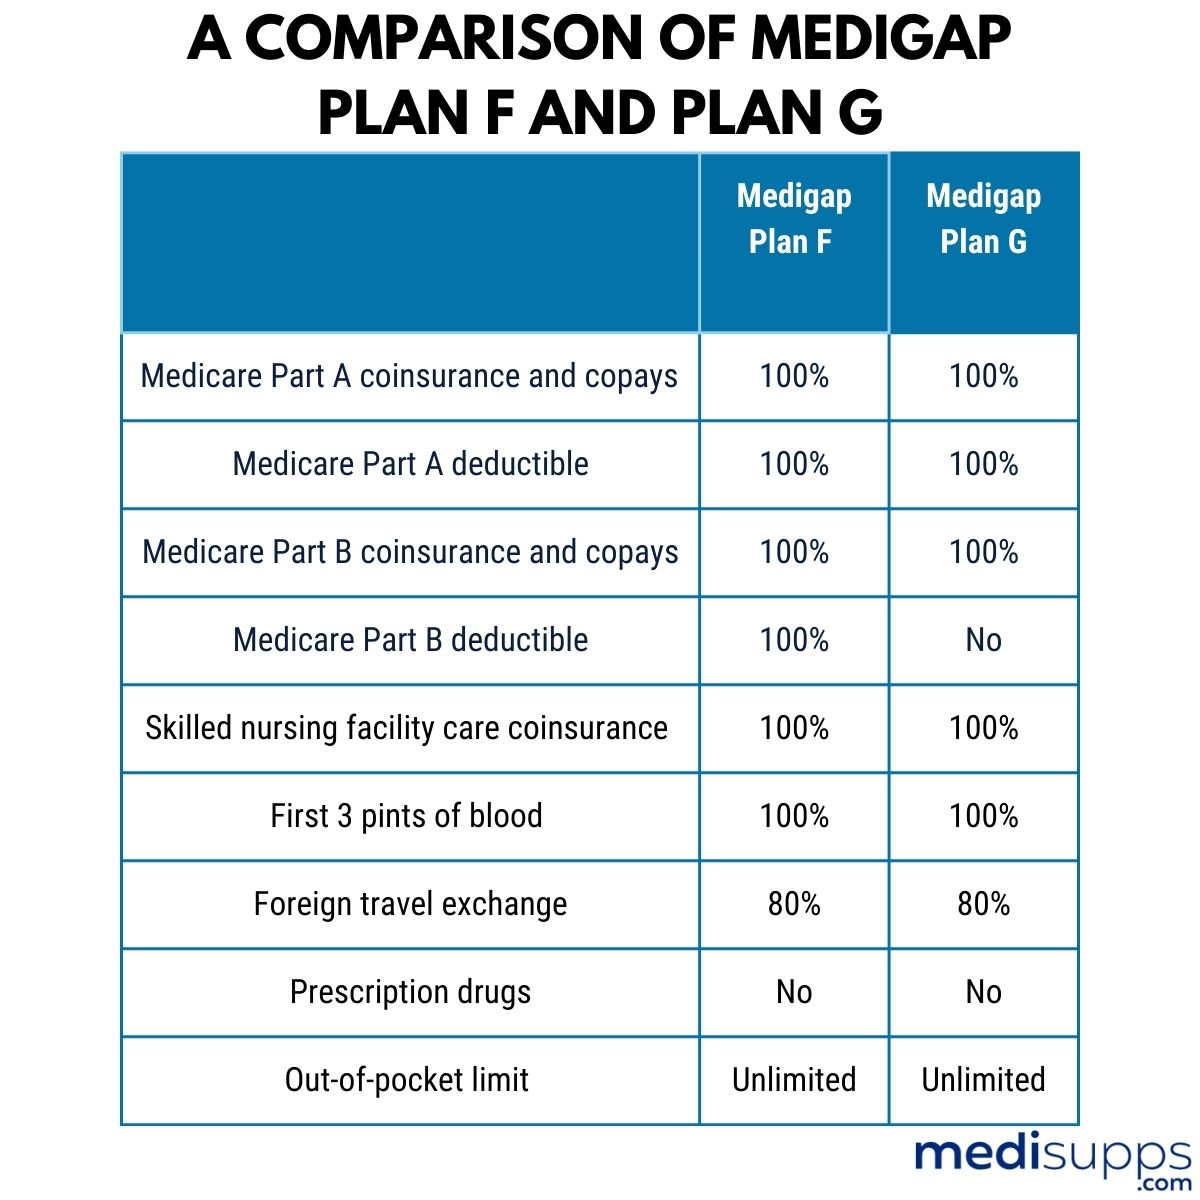 A Comparison of Medigap Plan F and Plan G